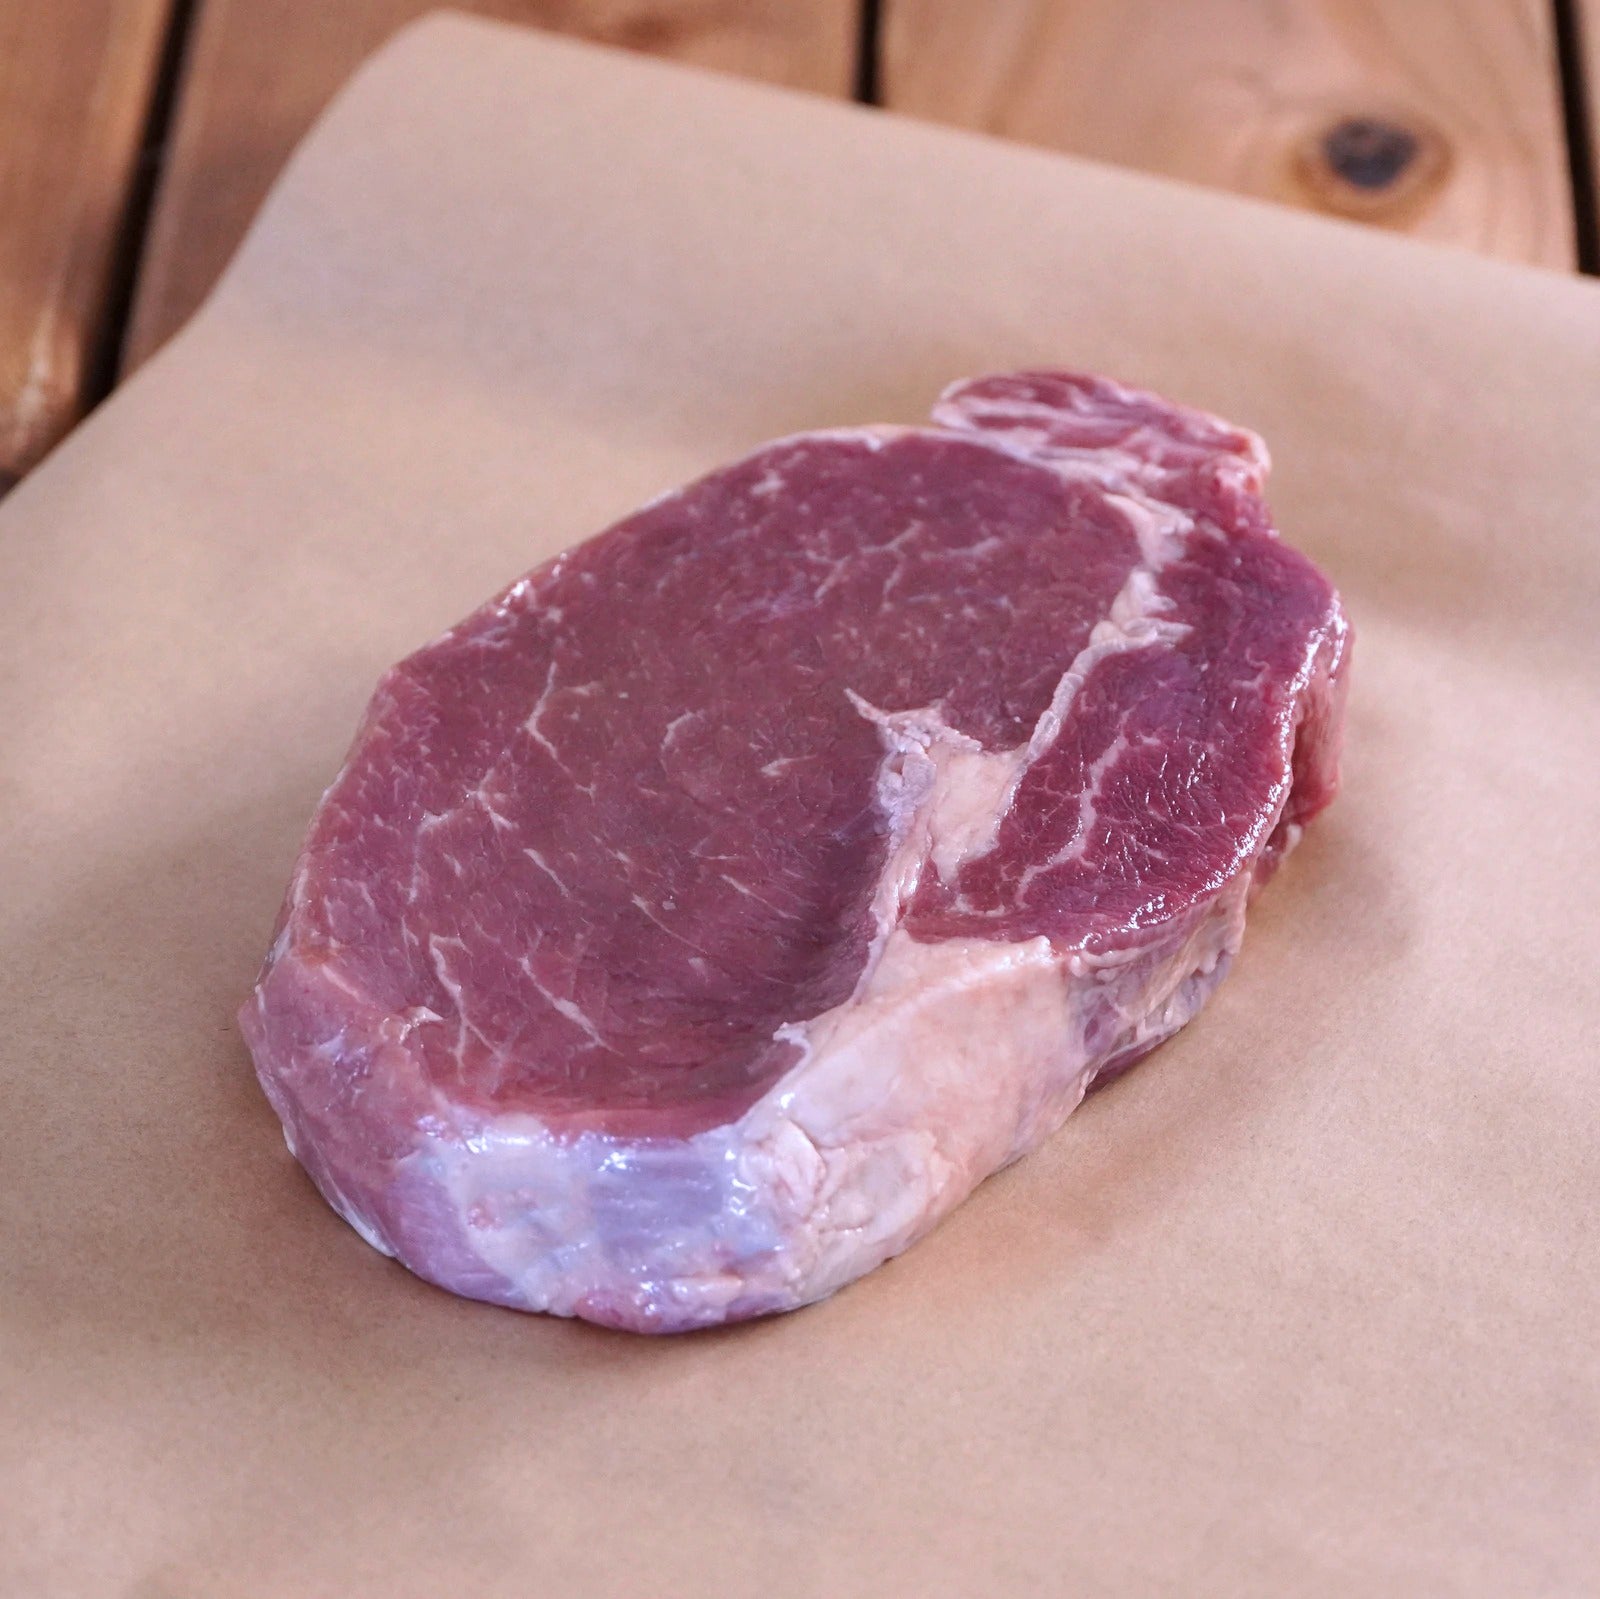 Variety Set of Grass-Fed Beef Steaks (3 Types, 18 Items, 4.2kg) - Horizon Farms